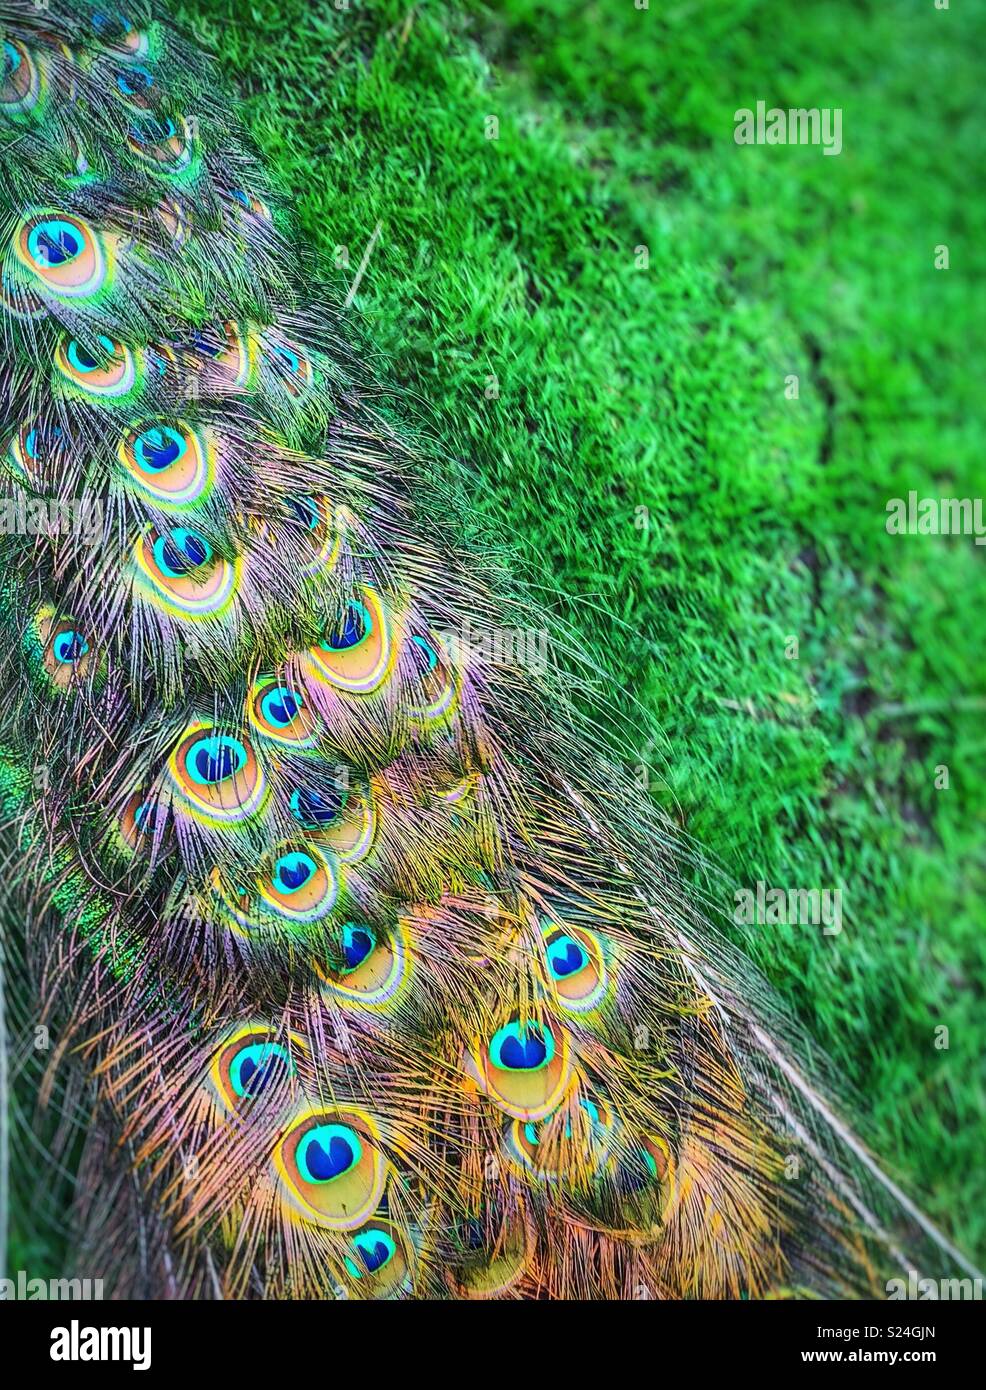 A peacock’s tail feathers dragging on grass Stock Photo